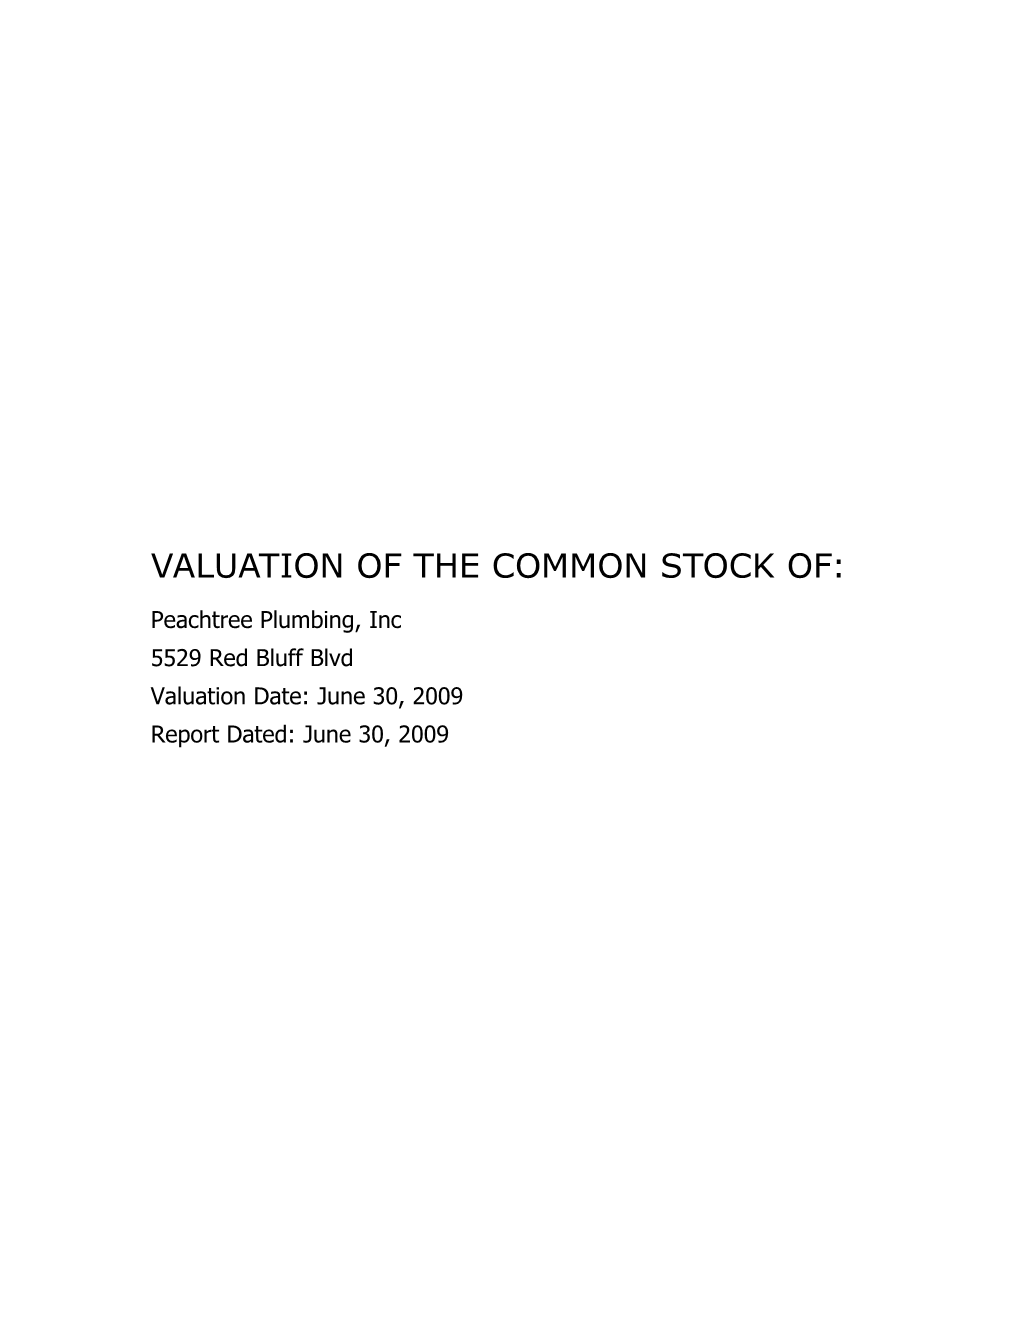 Valuation of the Common Stock Of